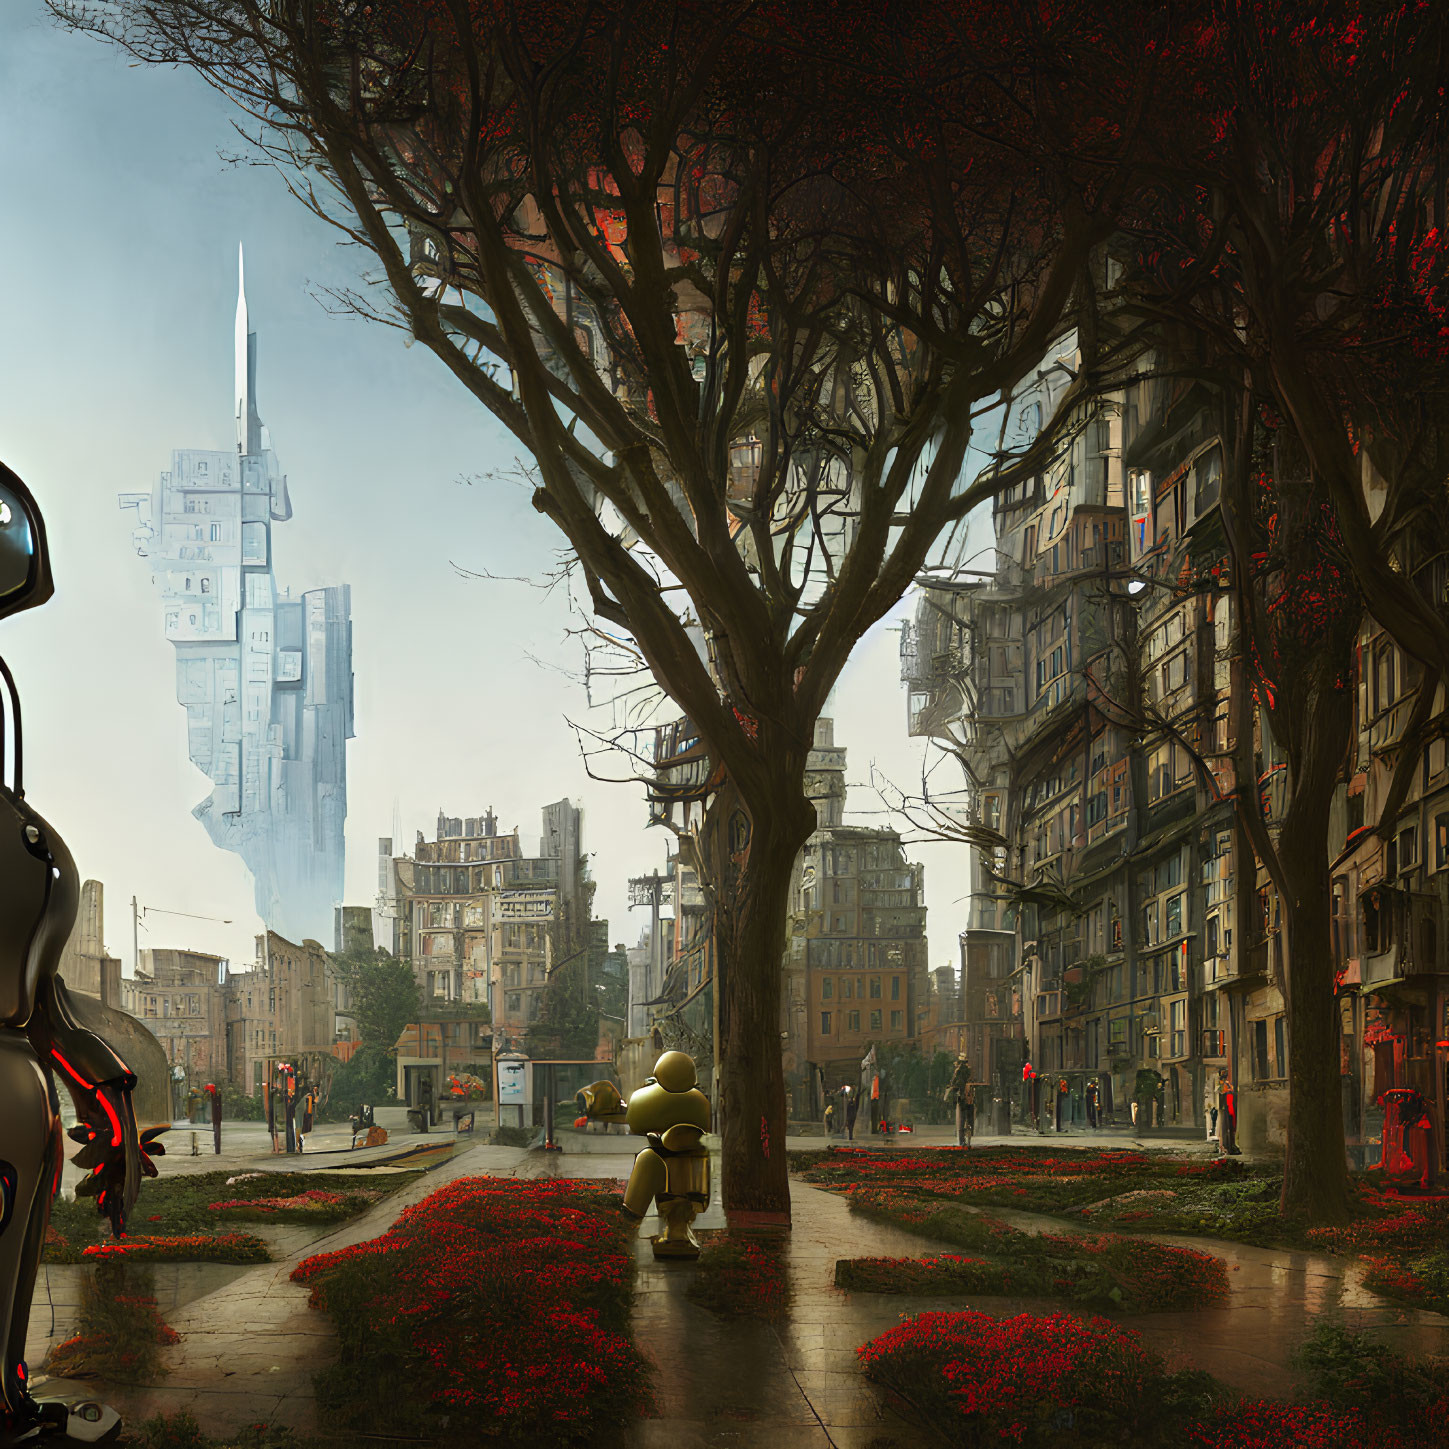 Futuristic cityscape with skyscraper, red trees, pedestrians, and golden robot